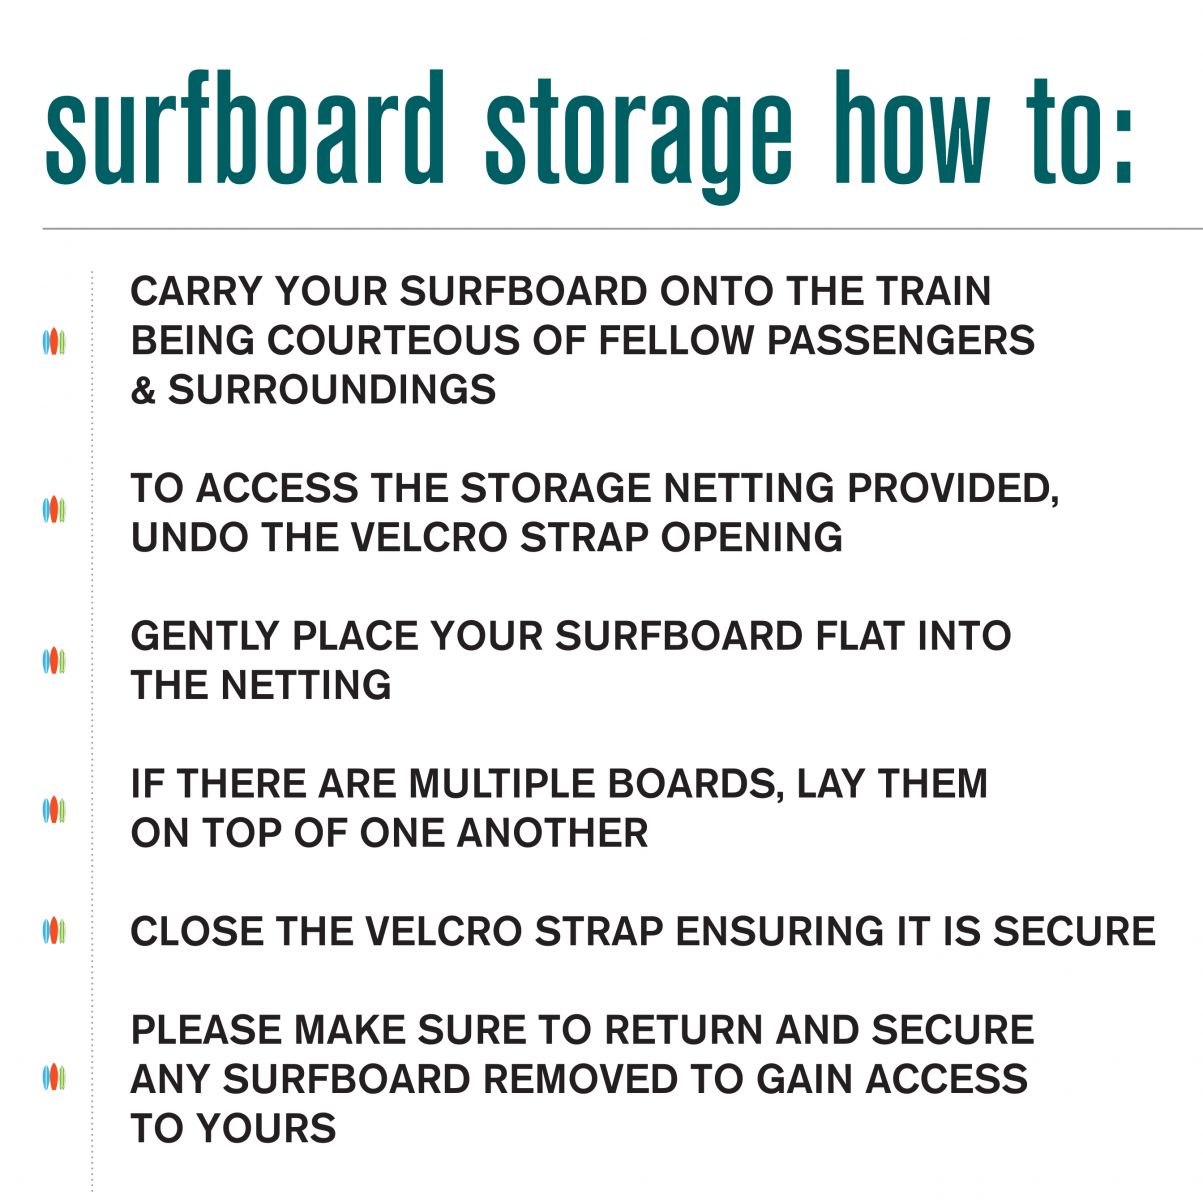 Surfboard Storage How To